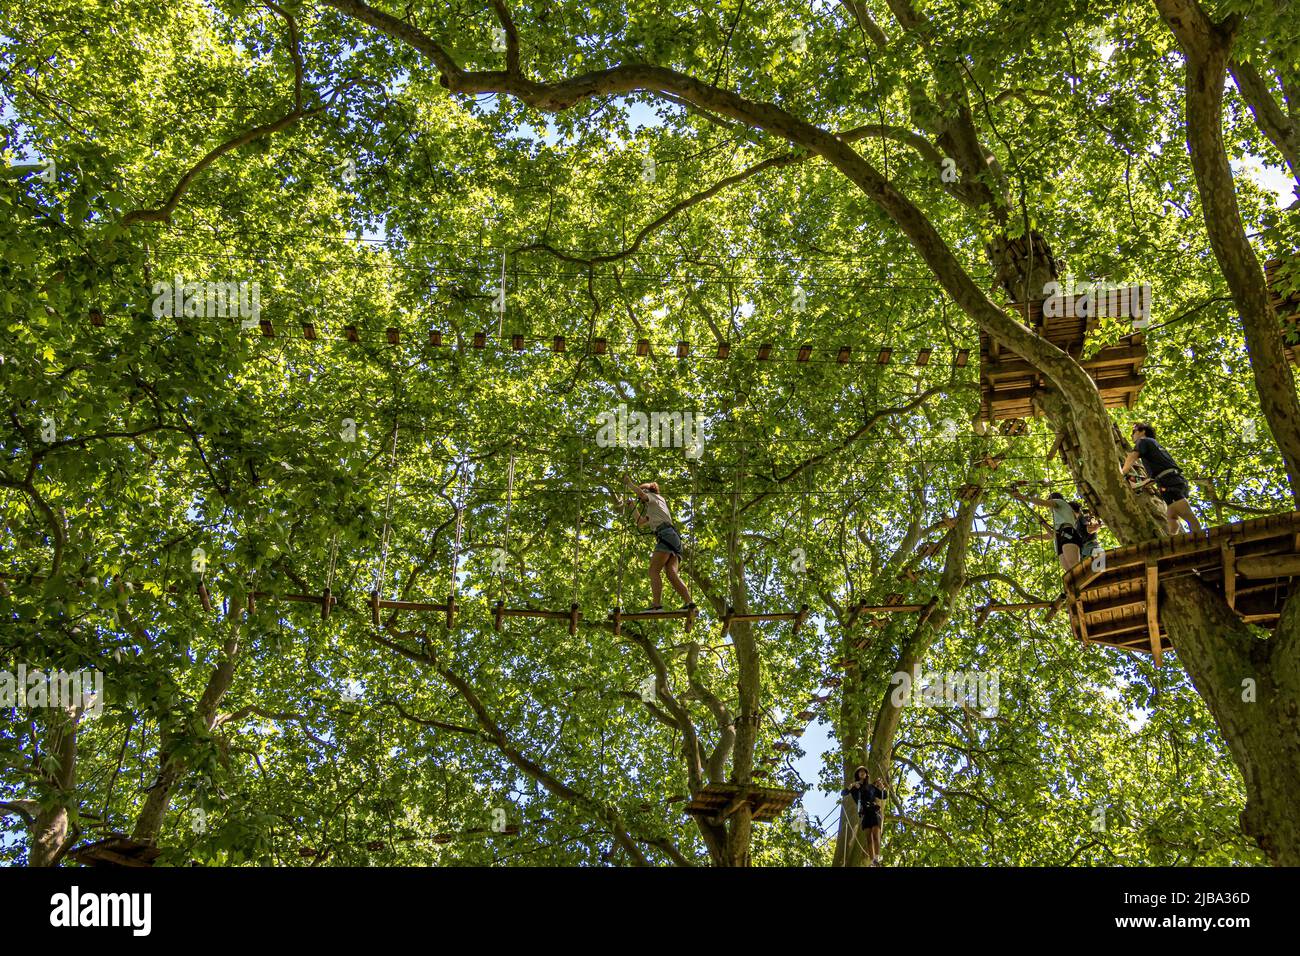 People high up in the trees using high ropes at the outdoor tree top adventure activity Go Ape at Battersea Park , London SW11, UK Stock Photo